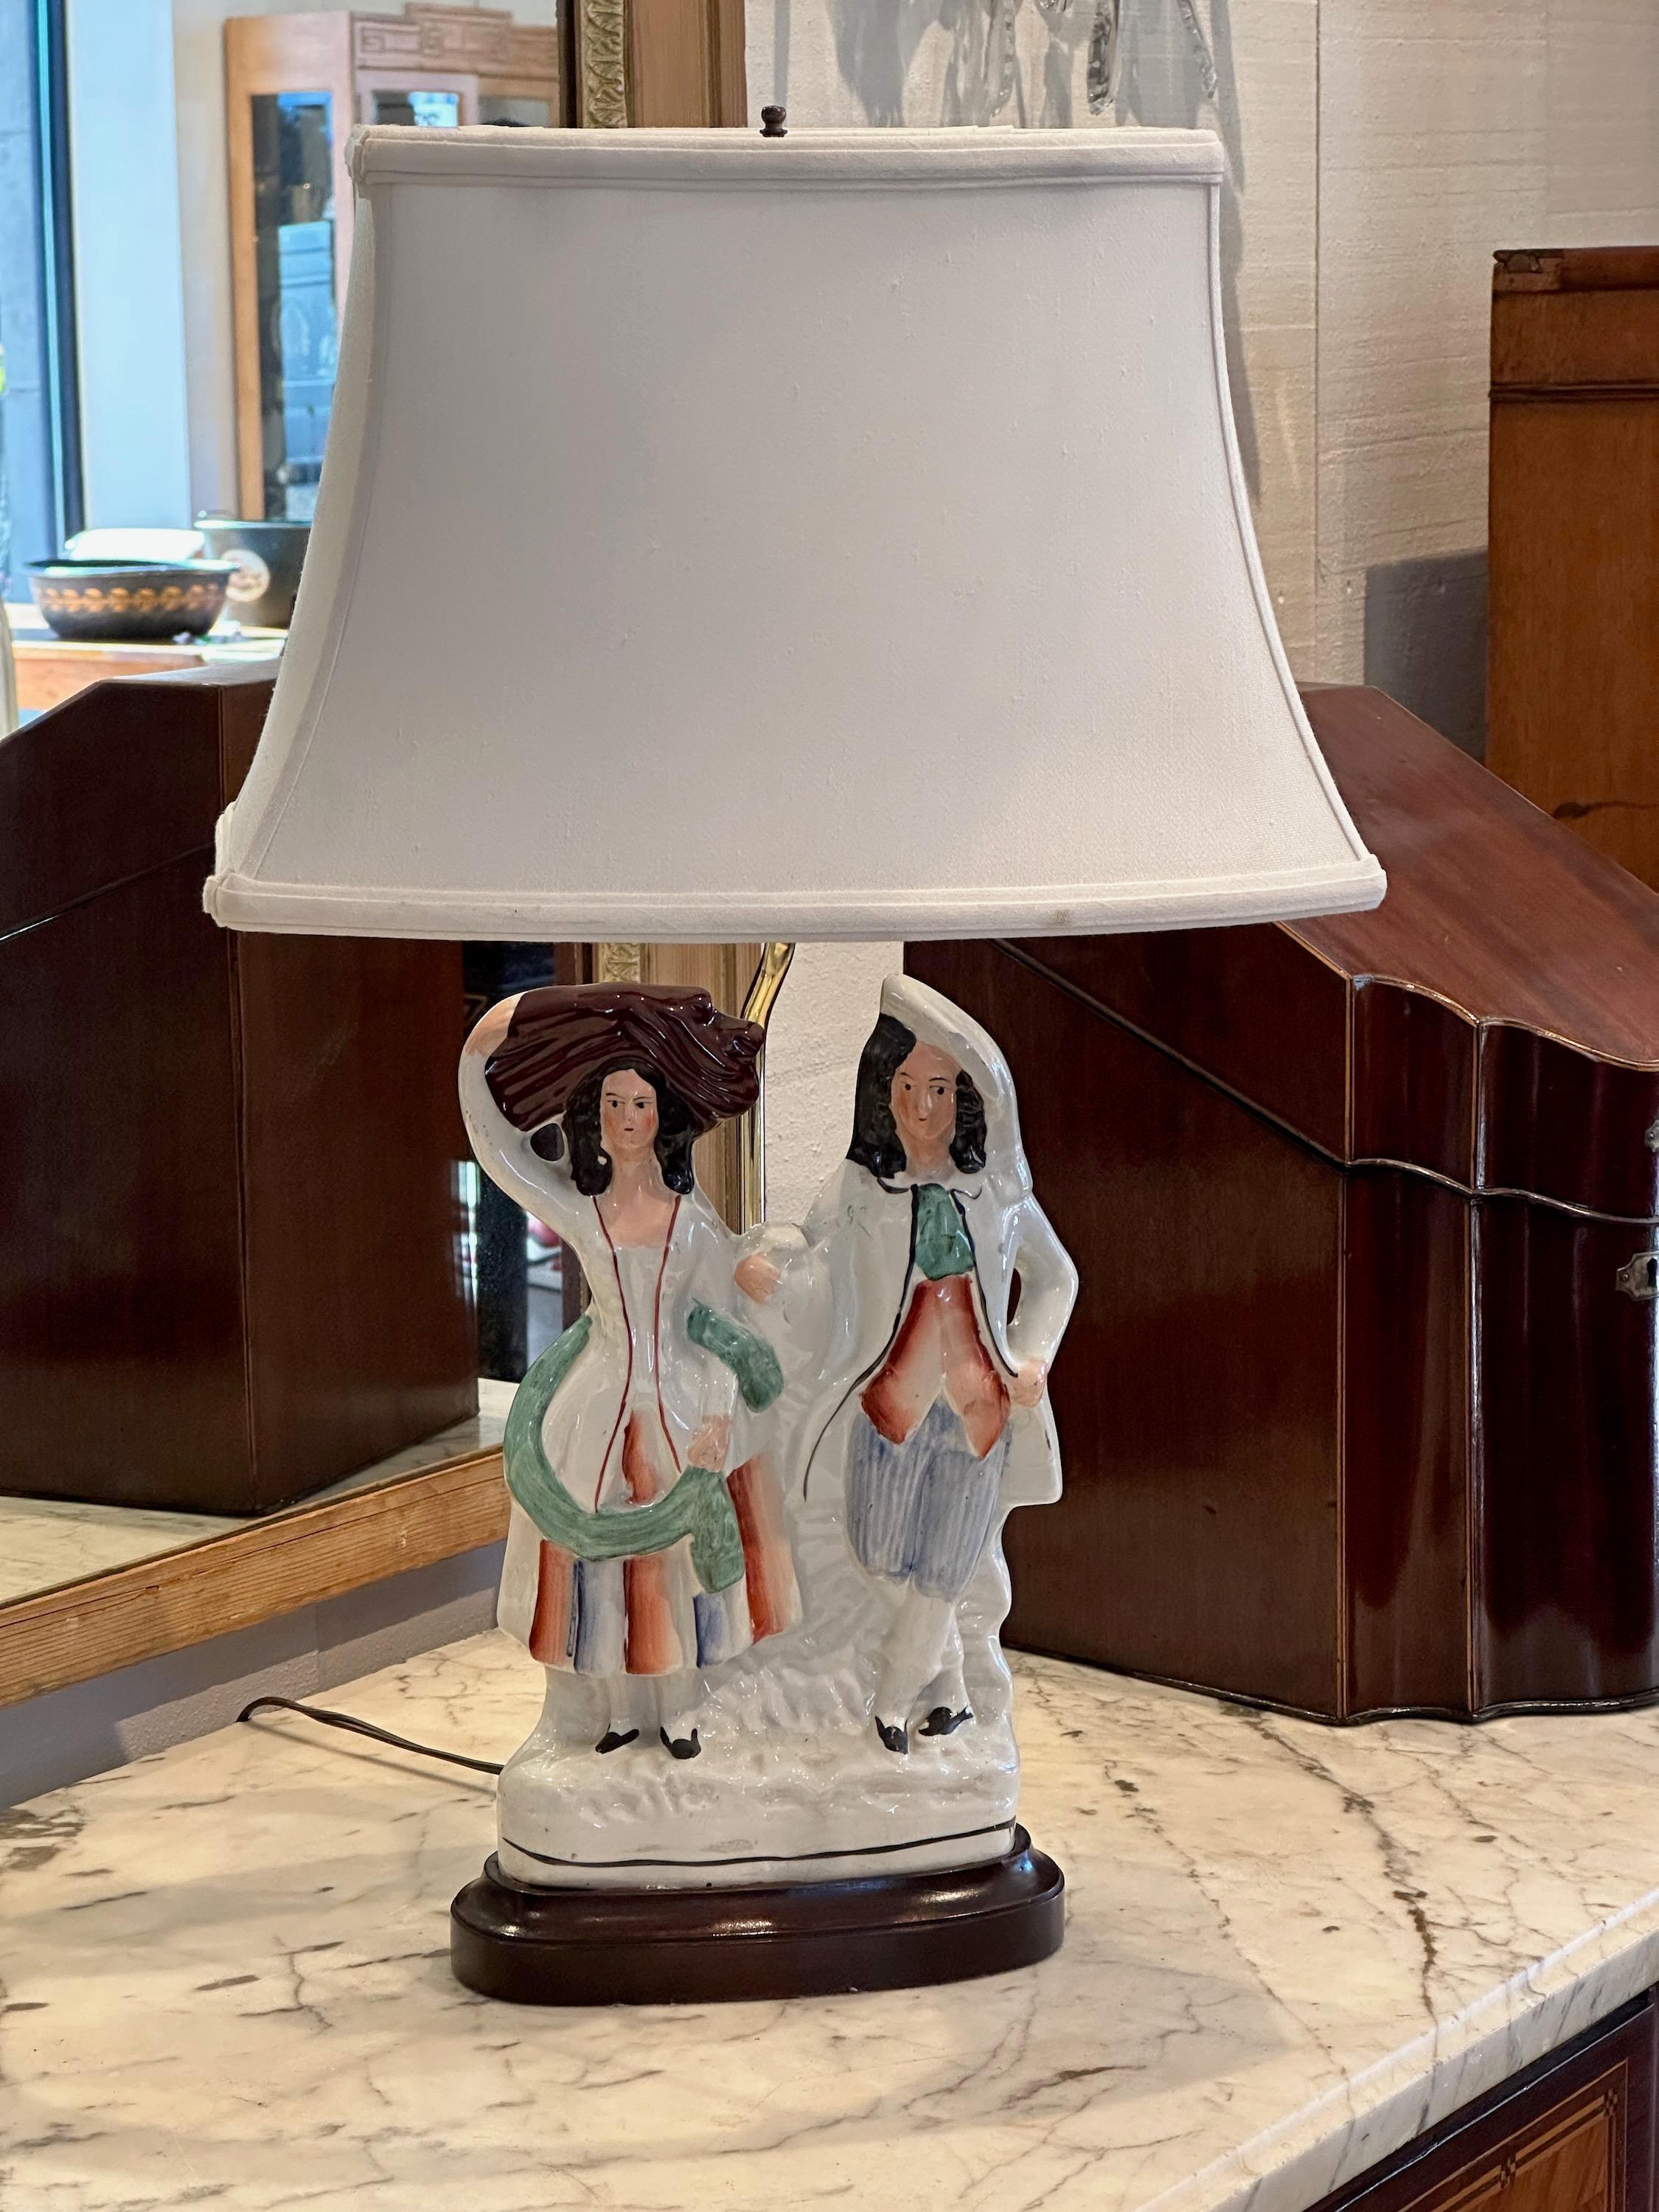 Ceramic 19th Century Staffordshire Mounted as Lamp For Sale